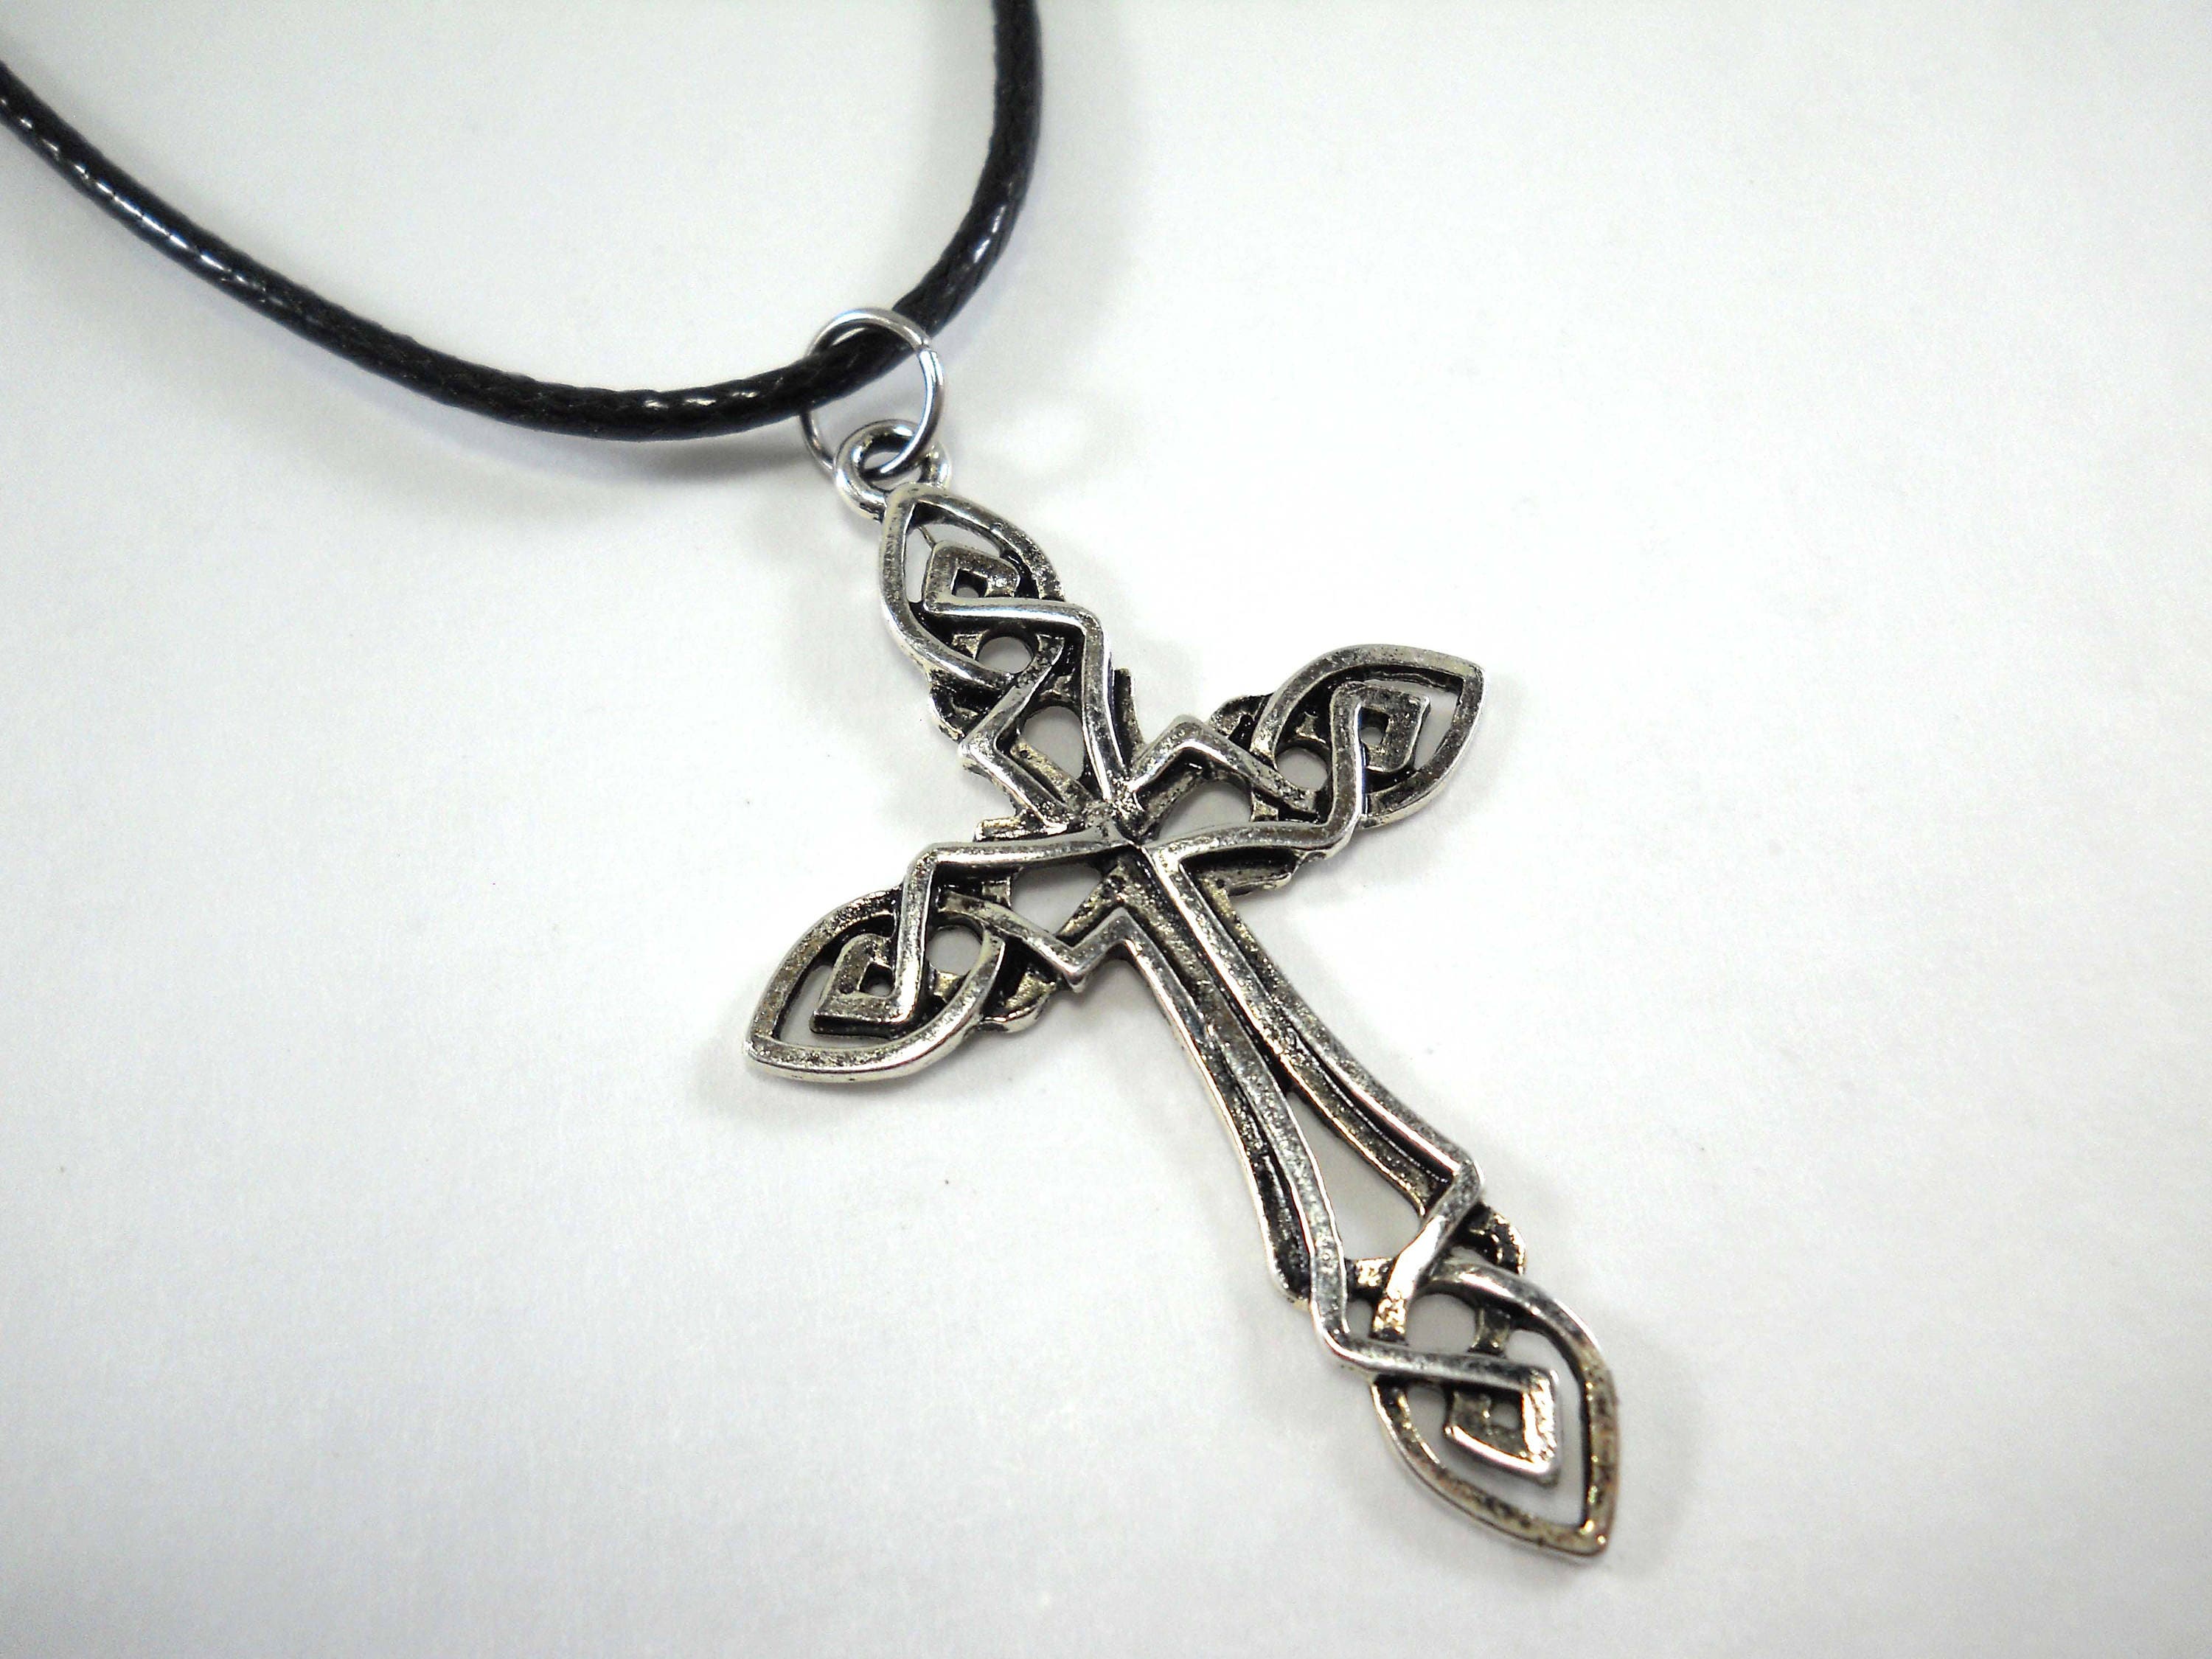 Mens Oxidized Sterling Silver Celtic Claddagh Pendant